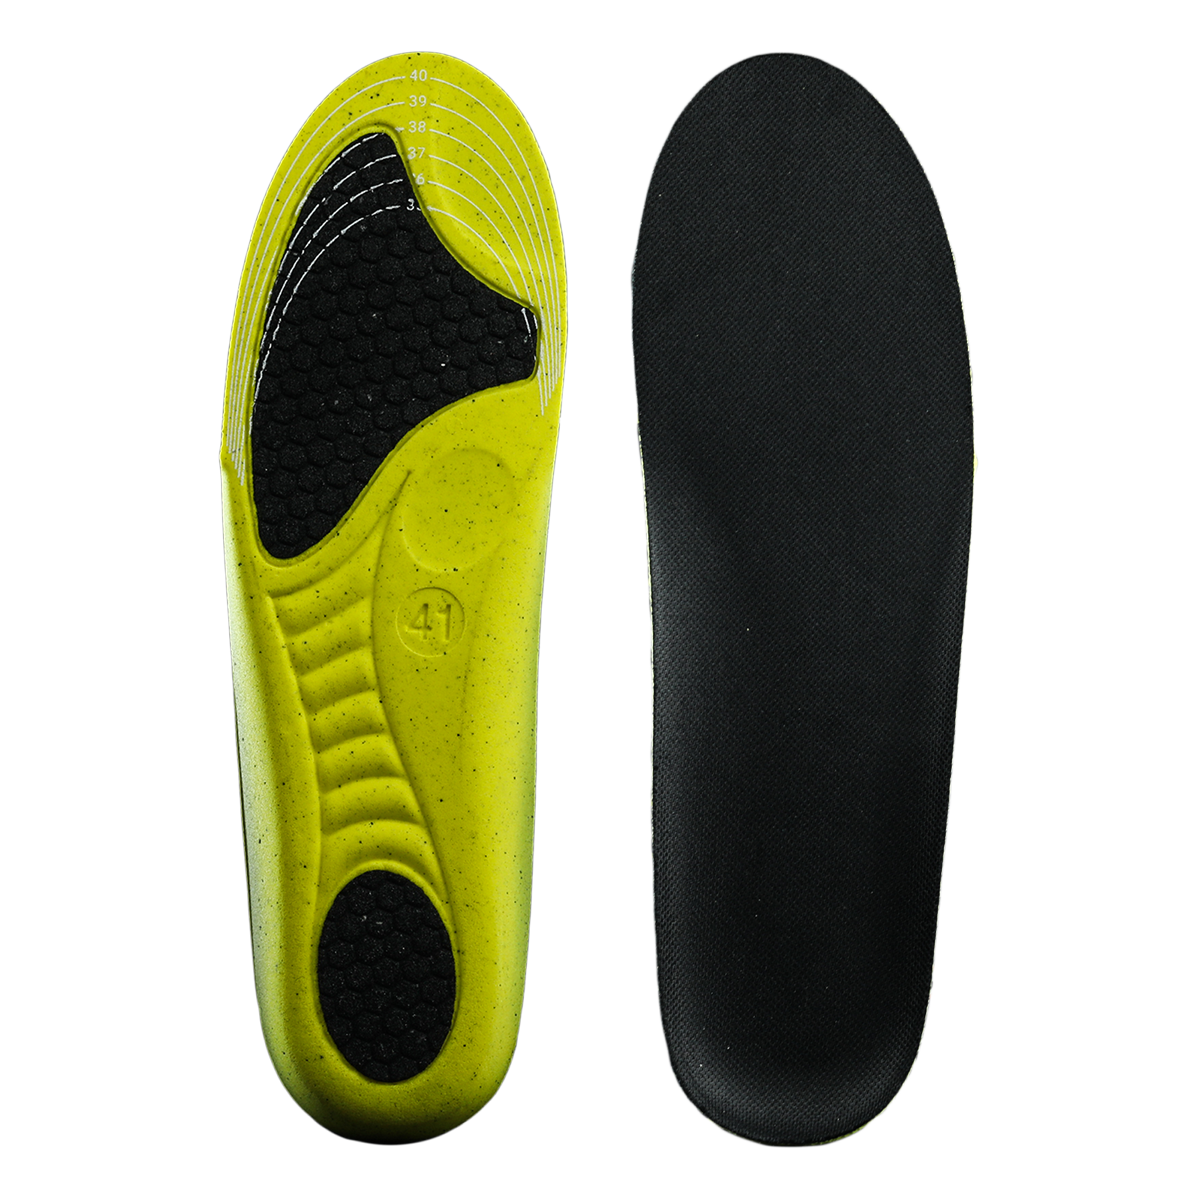 5mm Footbed